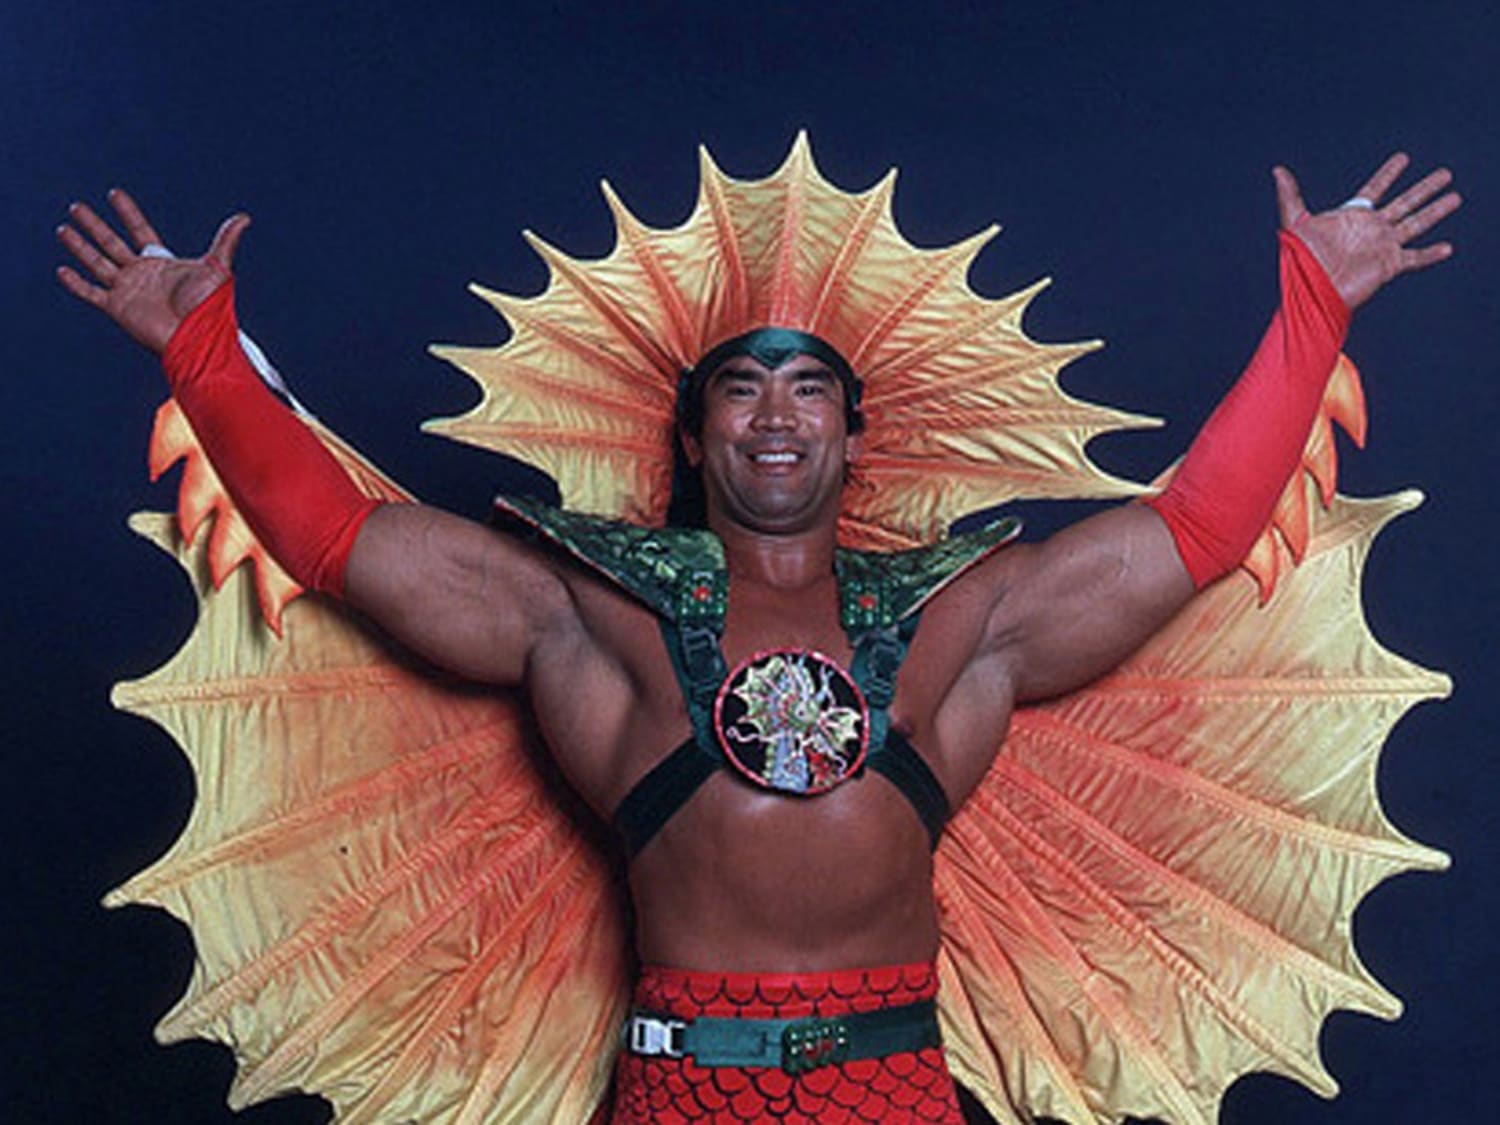 Ricky “The Dragon” Steamboat